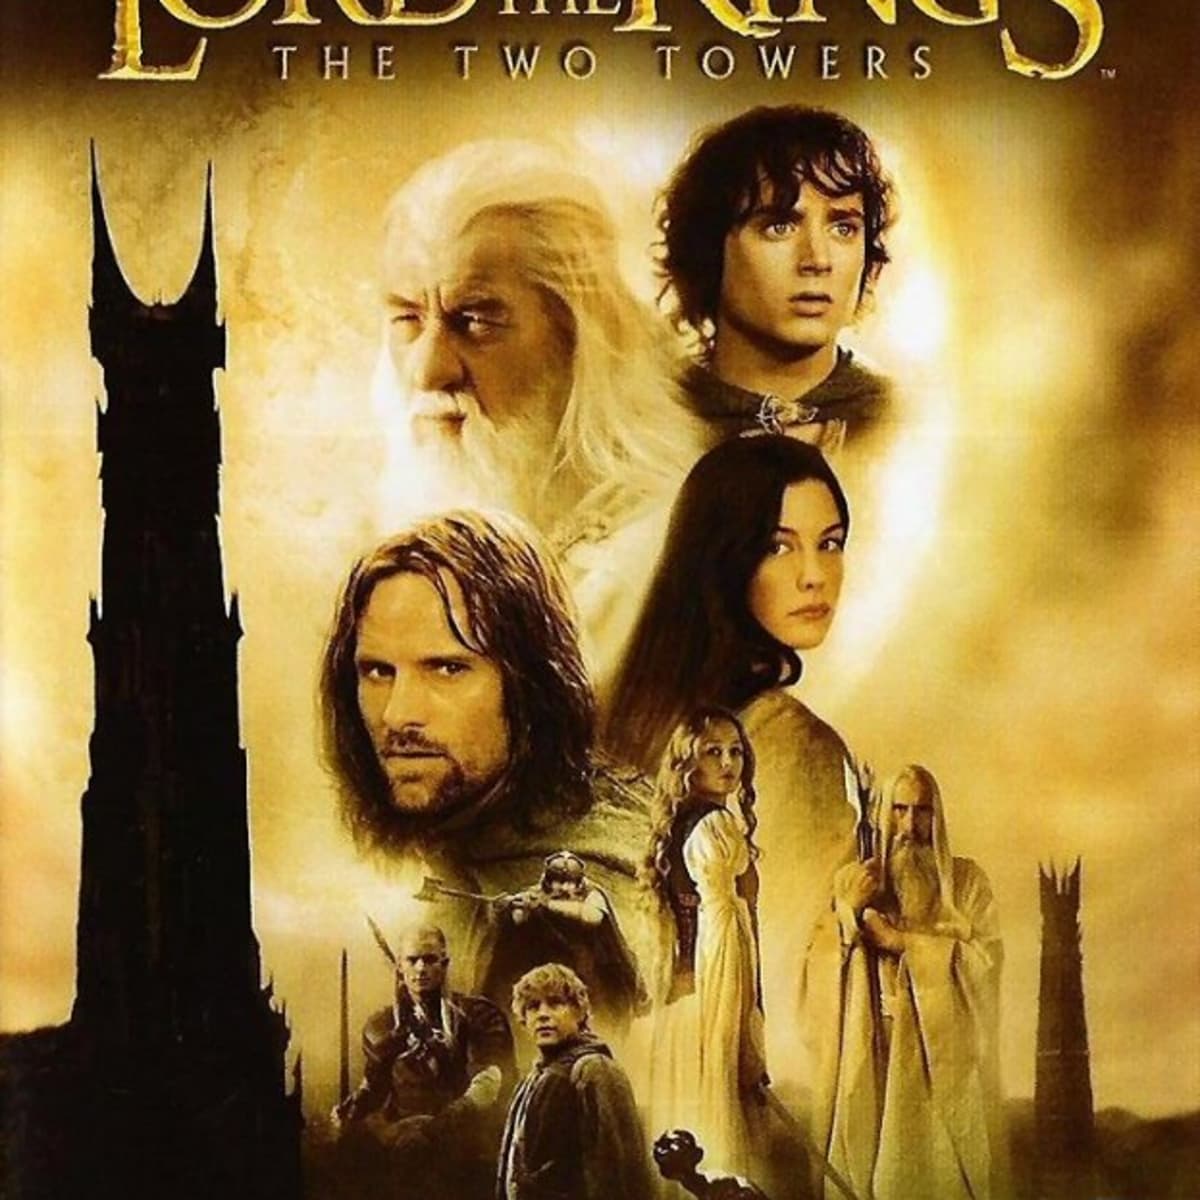 The Lord of the Rings: The Two Towers | Full Movie | Movies Anywhere